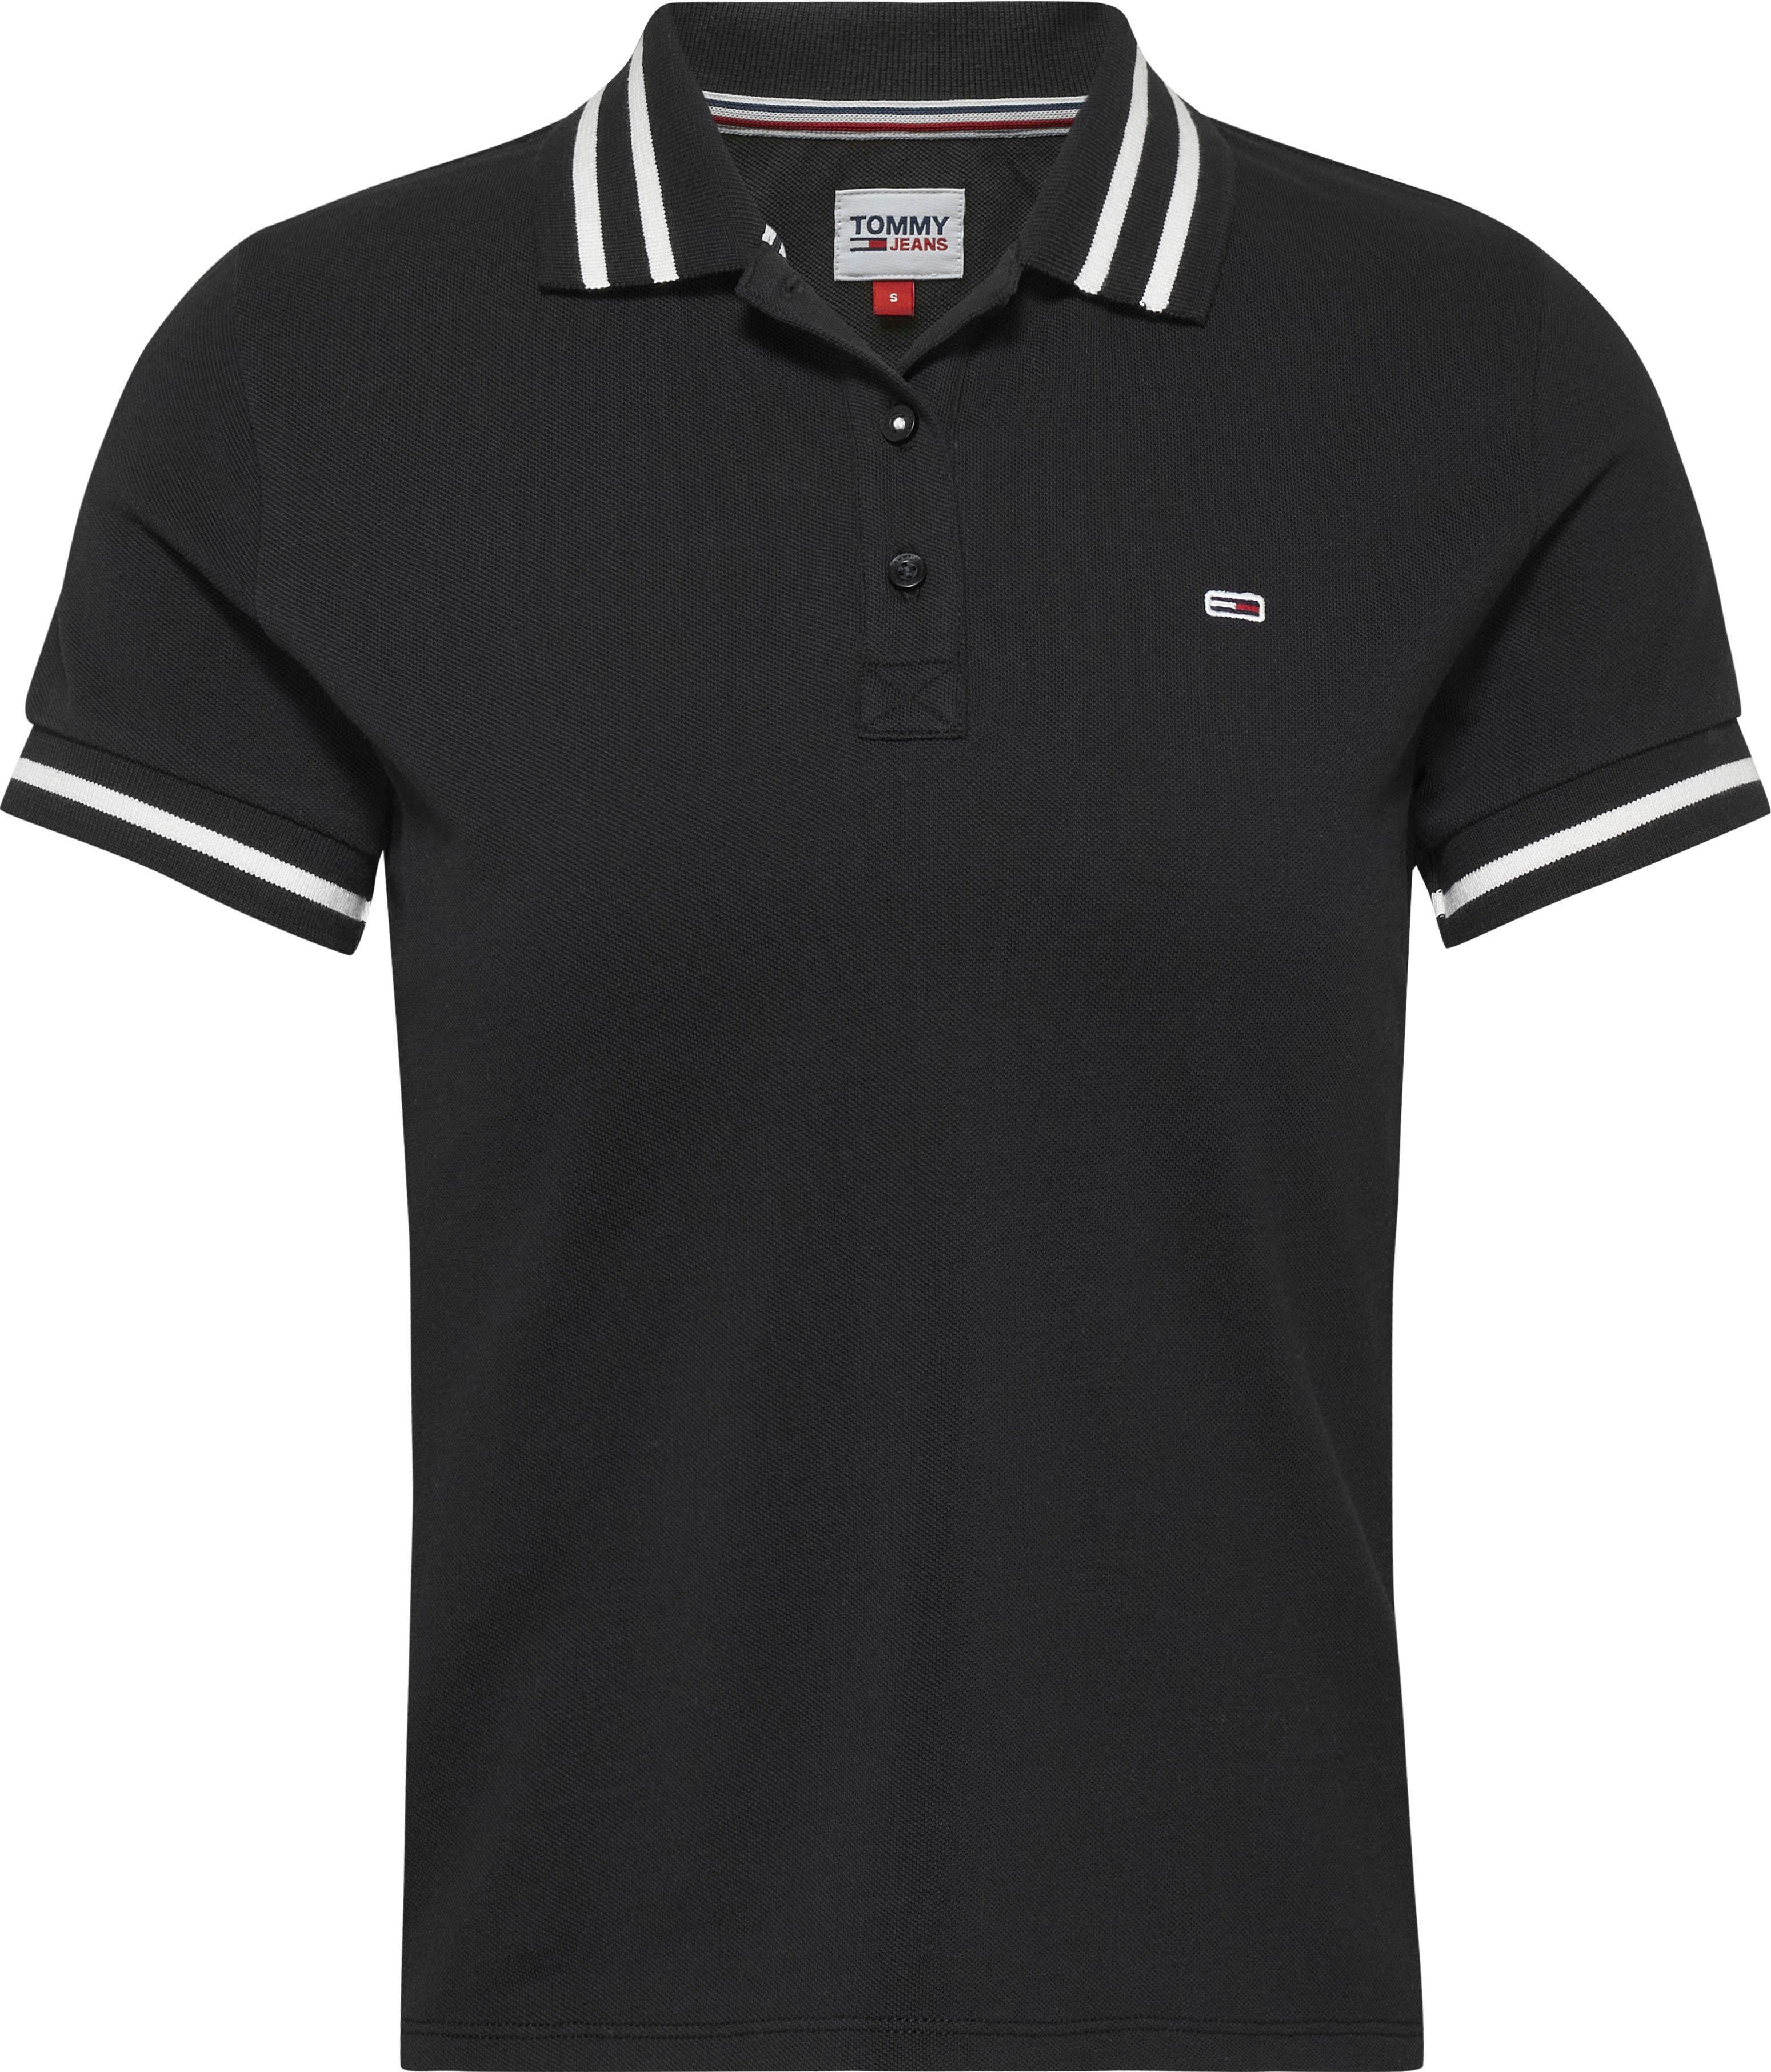 Black TJW & TIPPING Jeans POLO mit ESSENTIAL Tommy Poloshirt Kontraststreifen Jeans Tommy Label-Flag